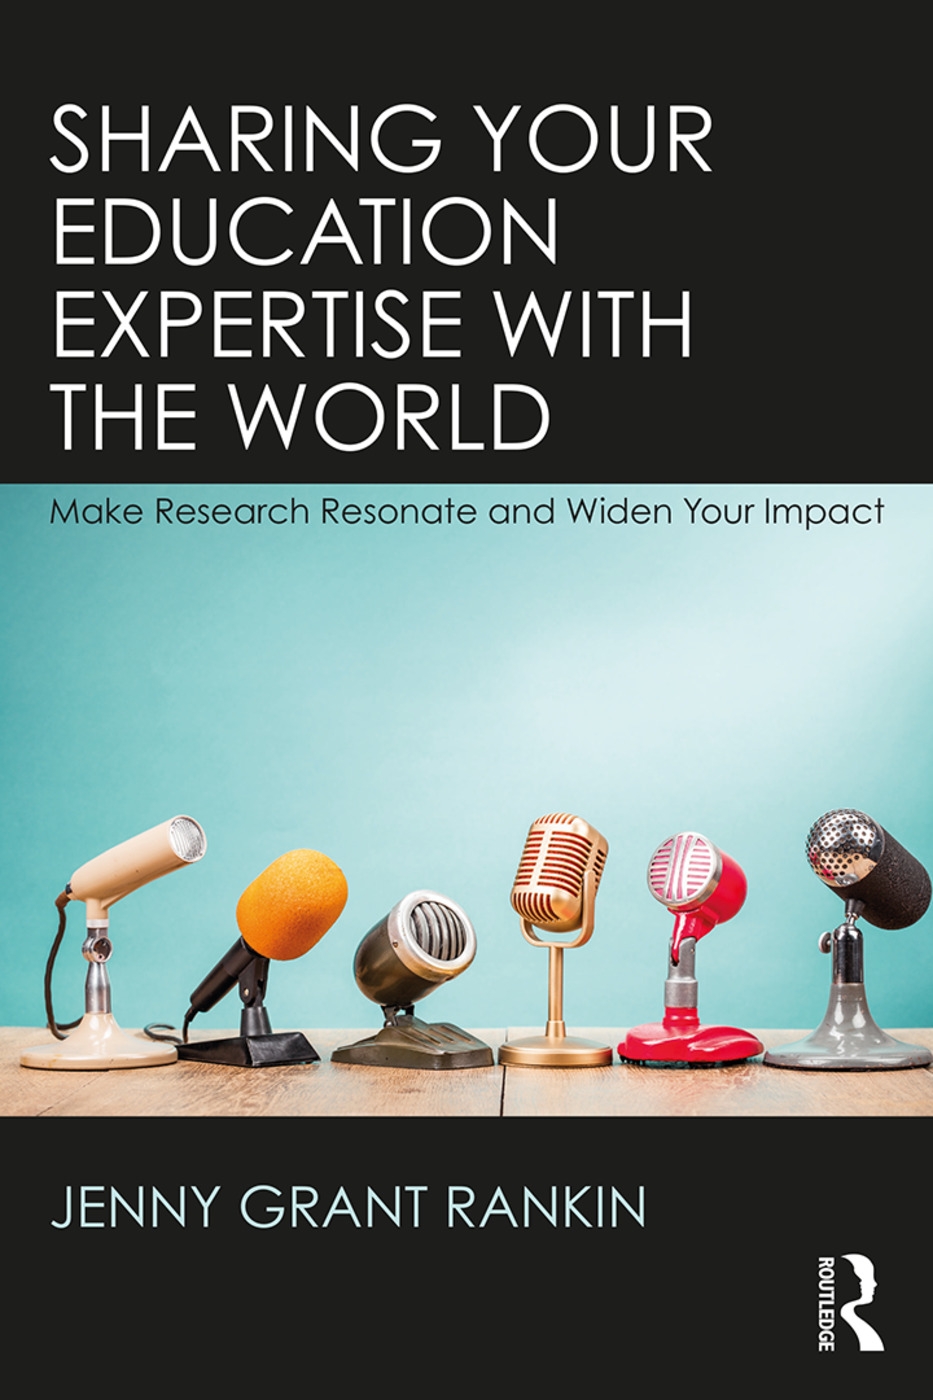 Sharing Your Education Expertise with the World: Make Research Resonate and Widen Your Impact